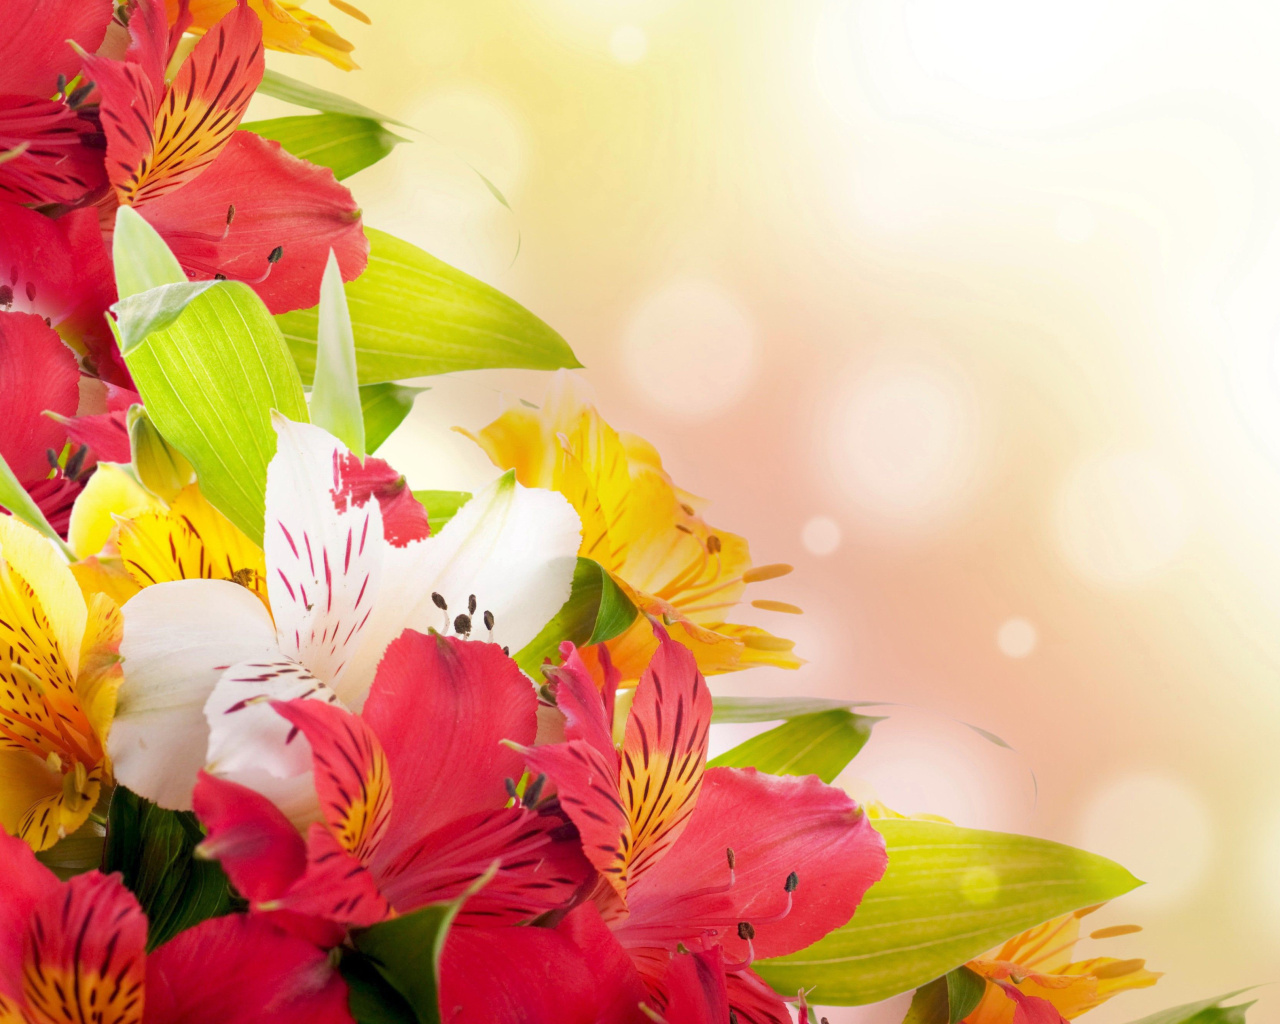 Flowers for the holiday of March 8 screenshot #1 1280x1024